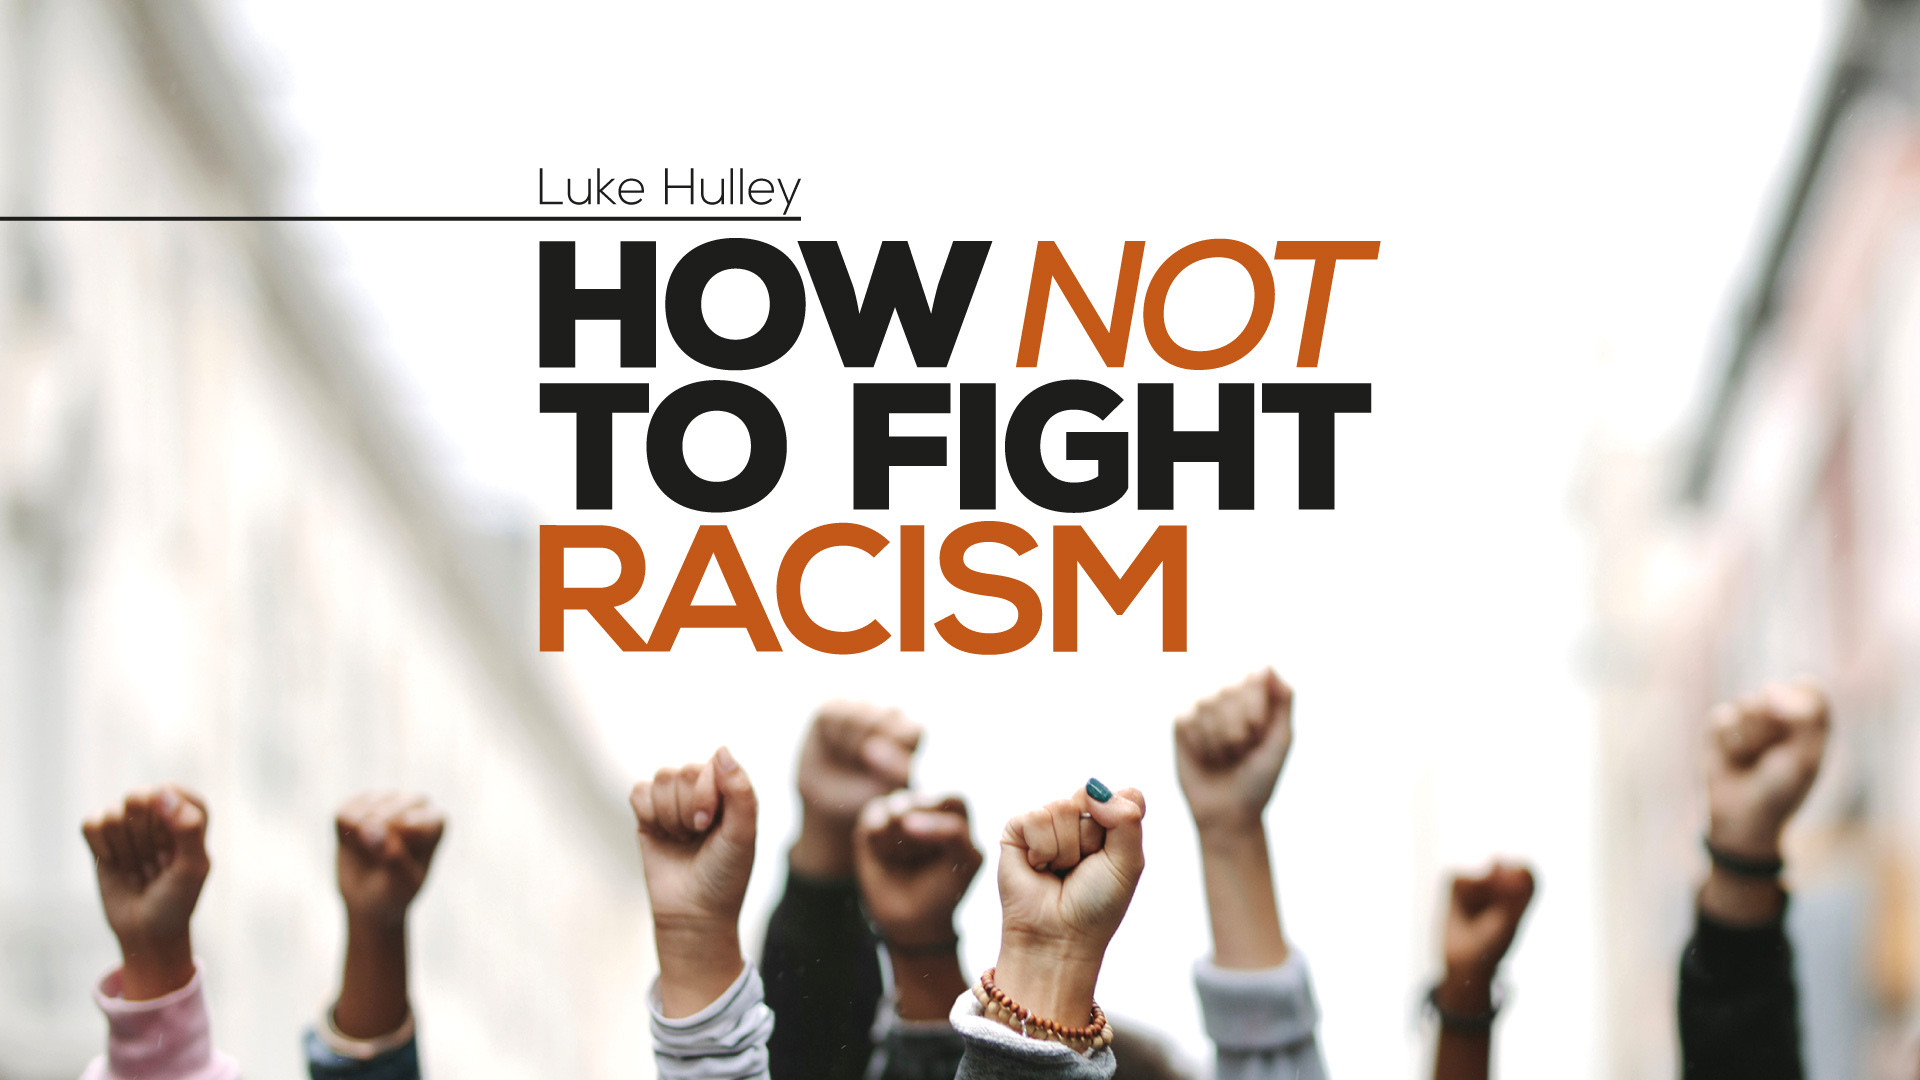 HowNotToFightRacism_1280x720